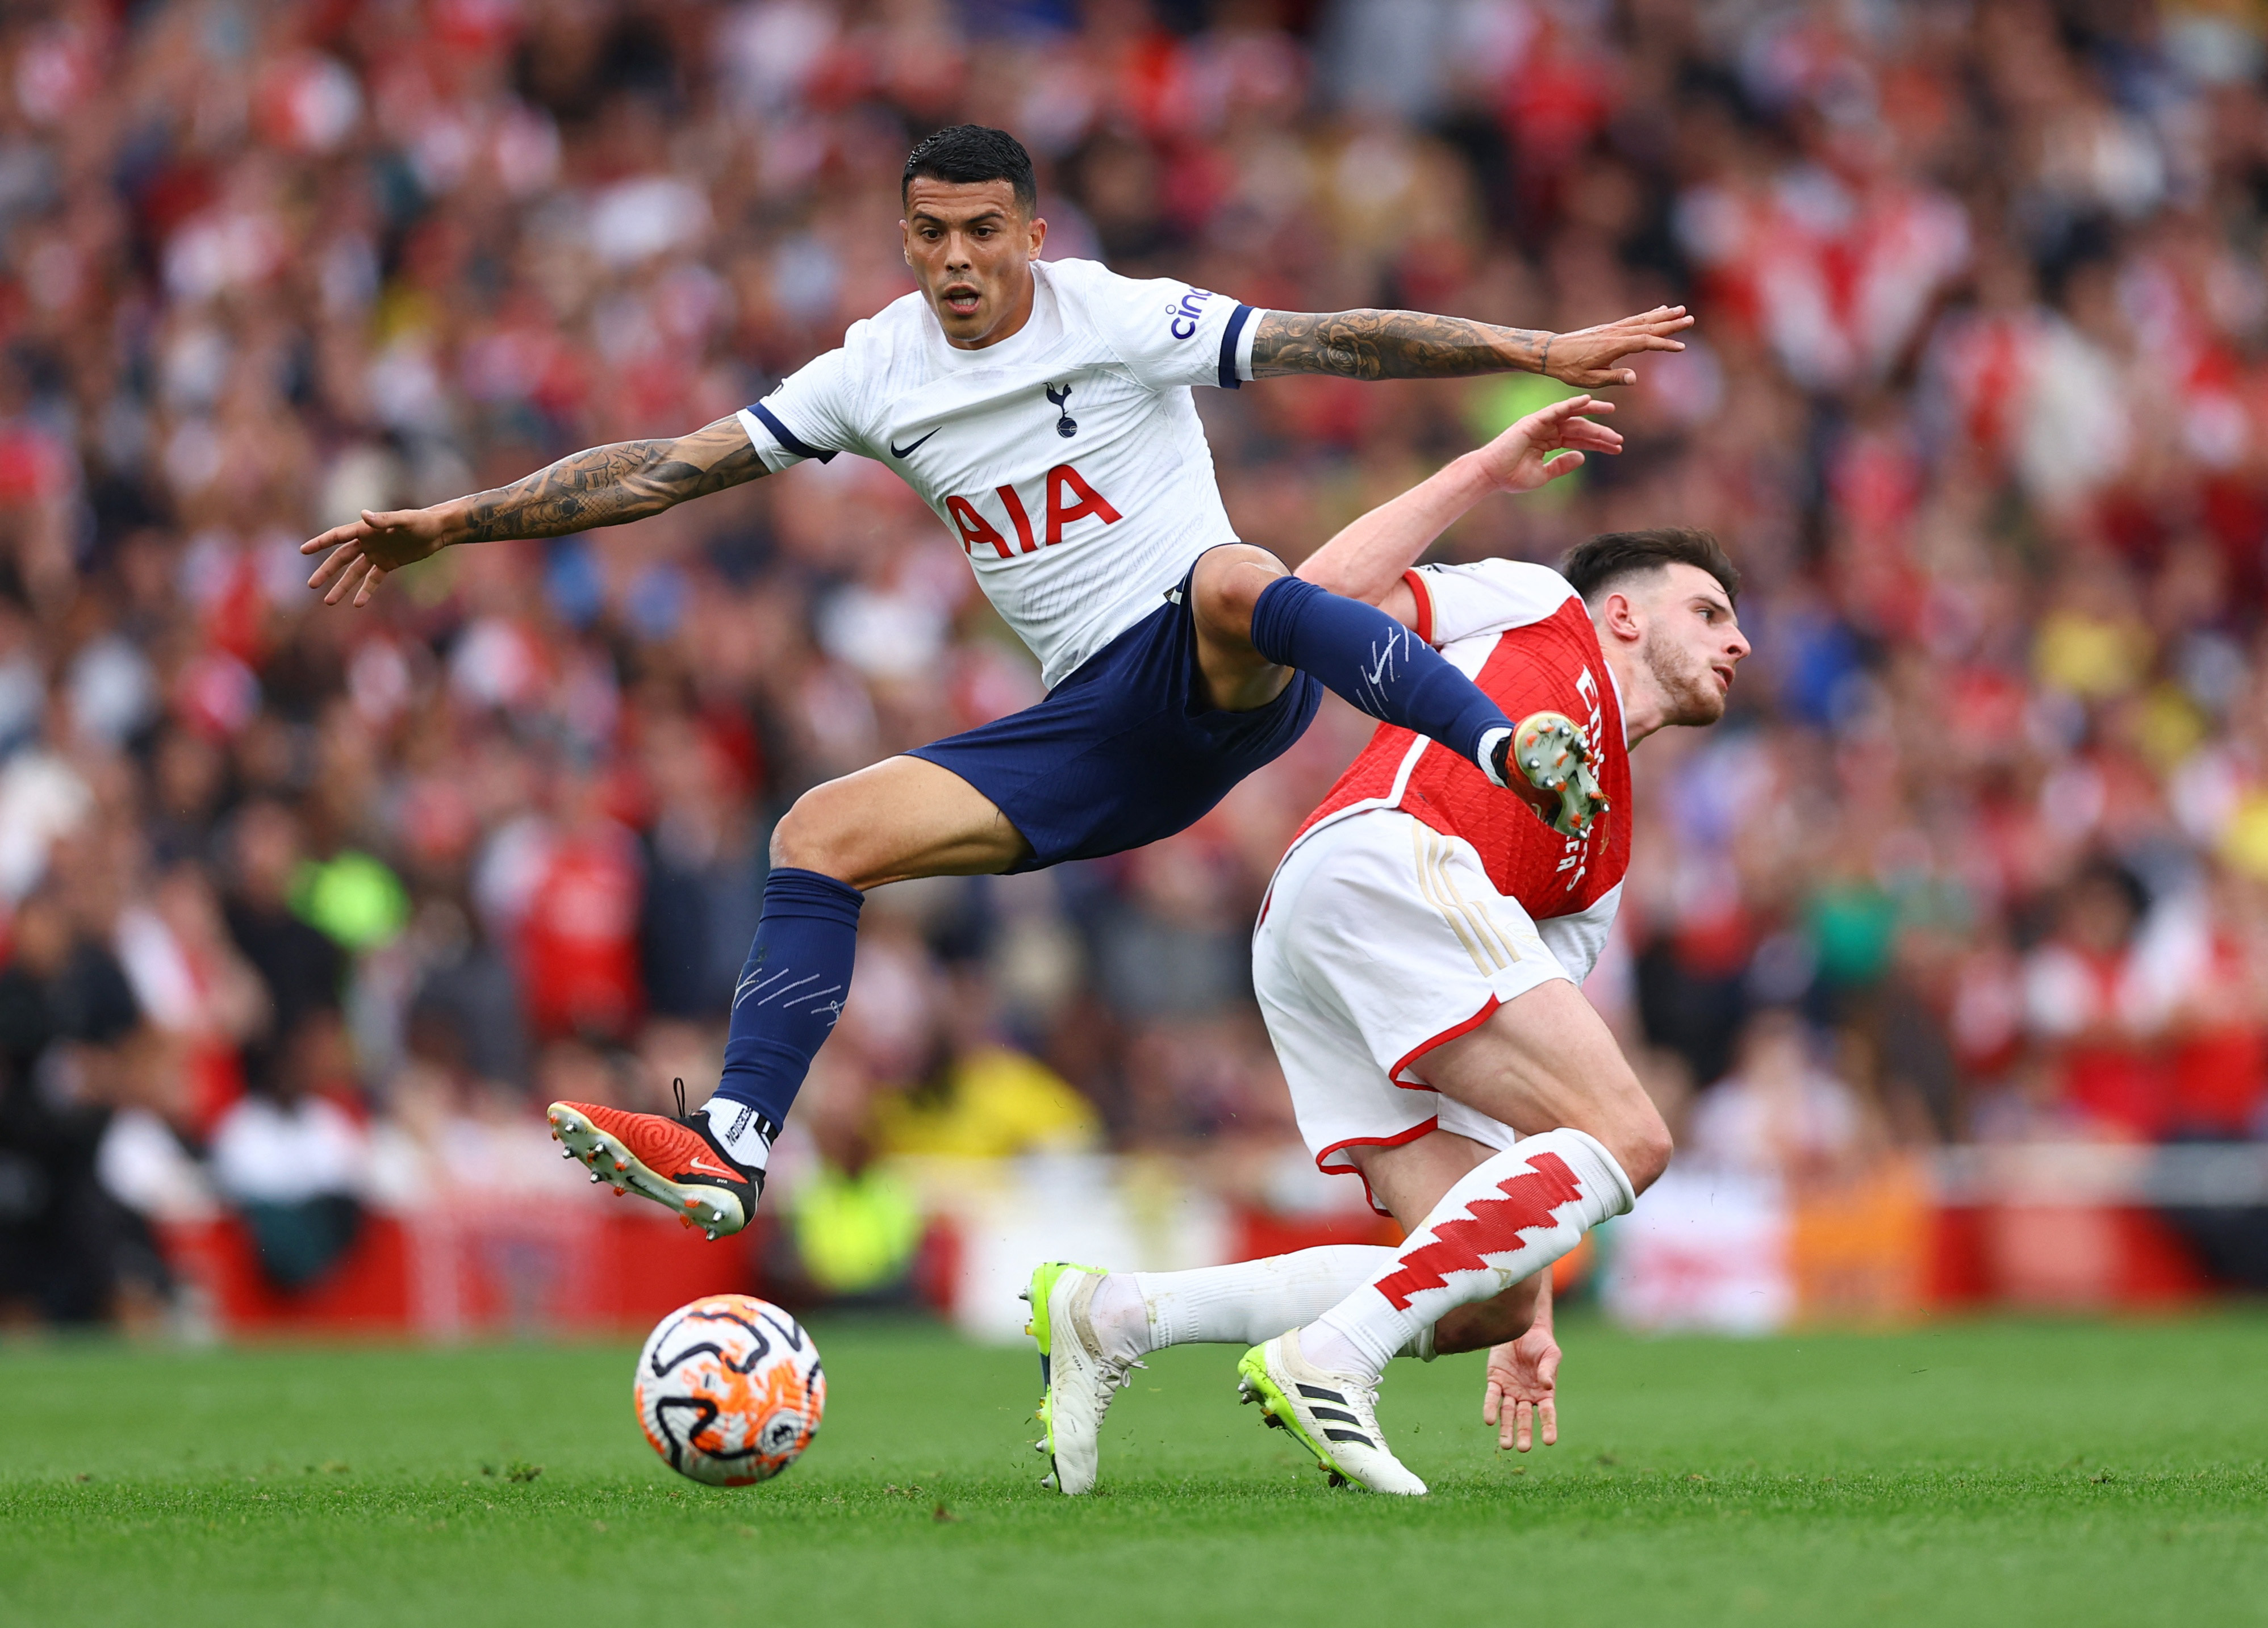 Son's double earns Tottenham 2-2 draw at Arsenal